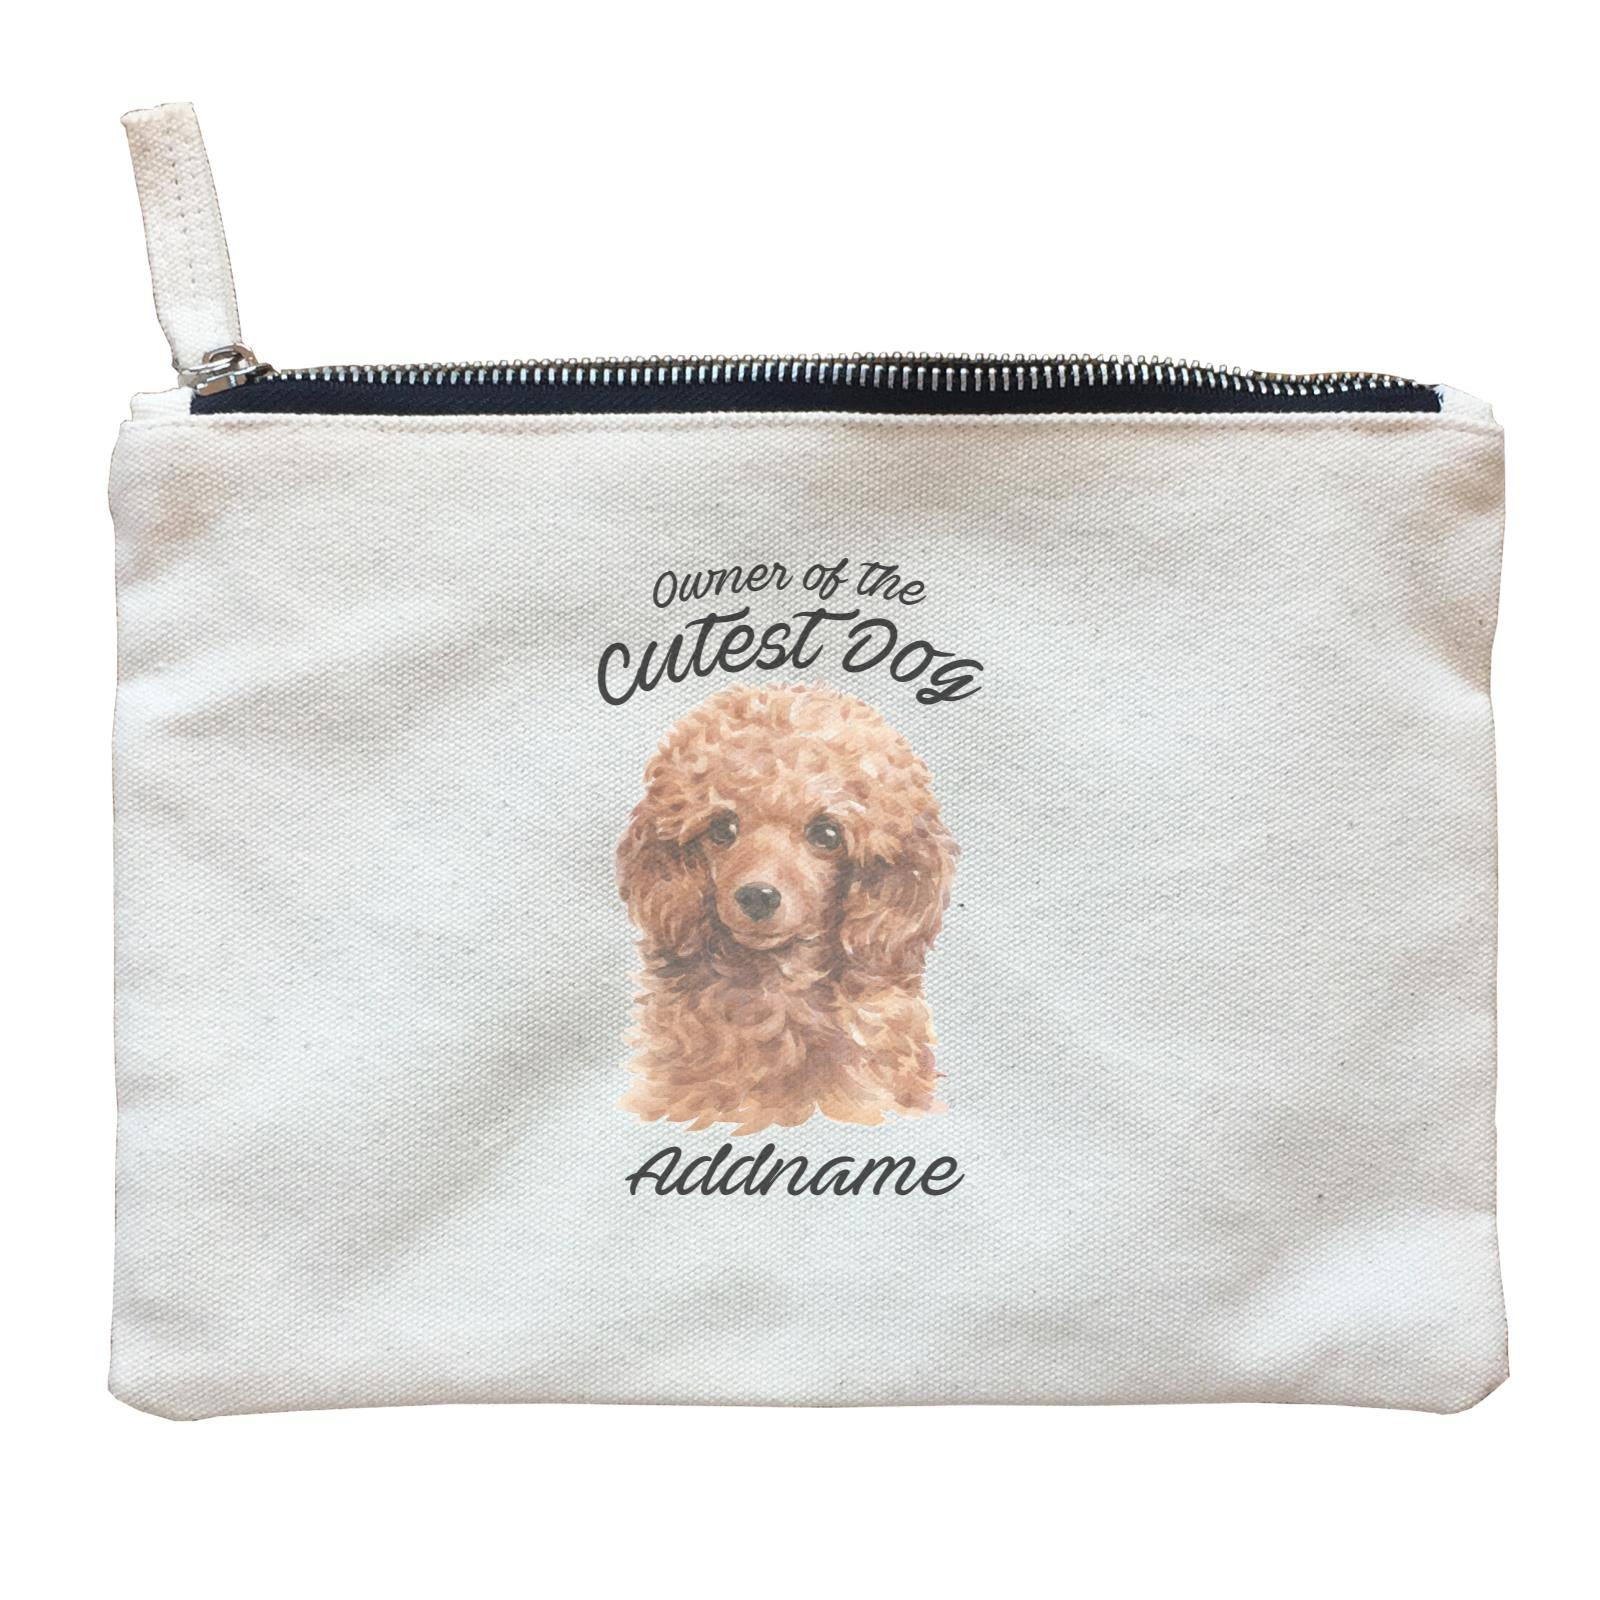 Watercolor Dog Owner Of The Cutest Dog Poodle Brown Addname Zipper Pouch